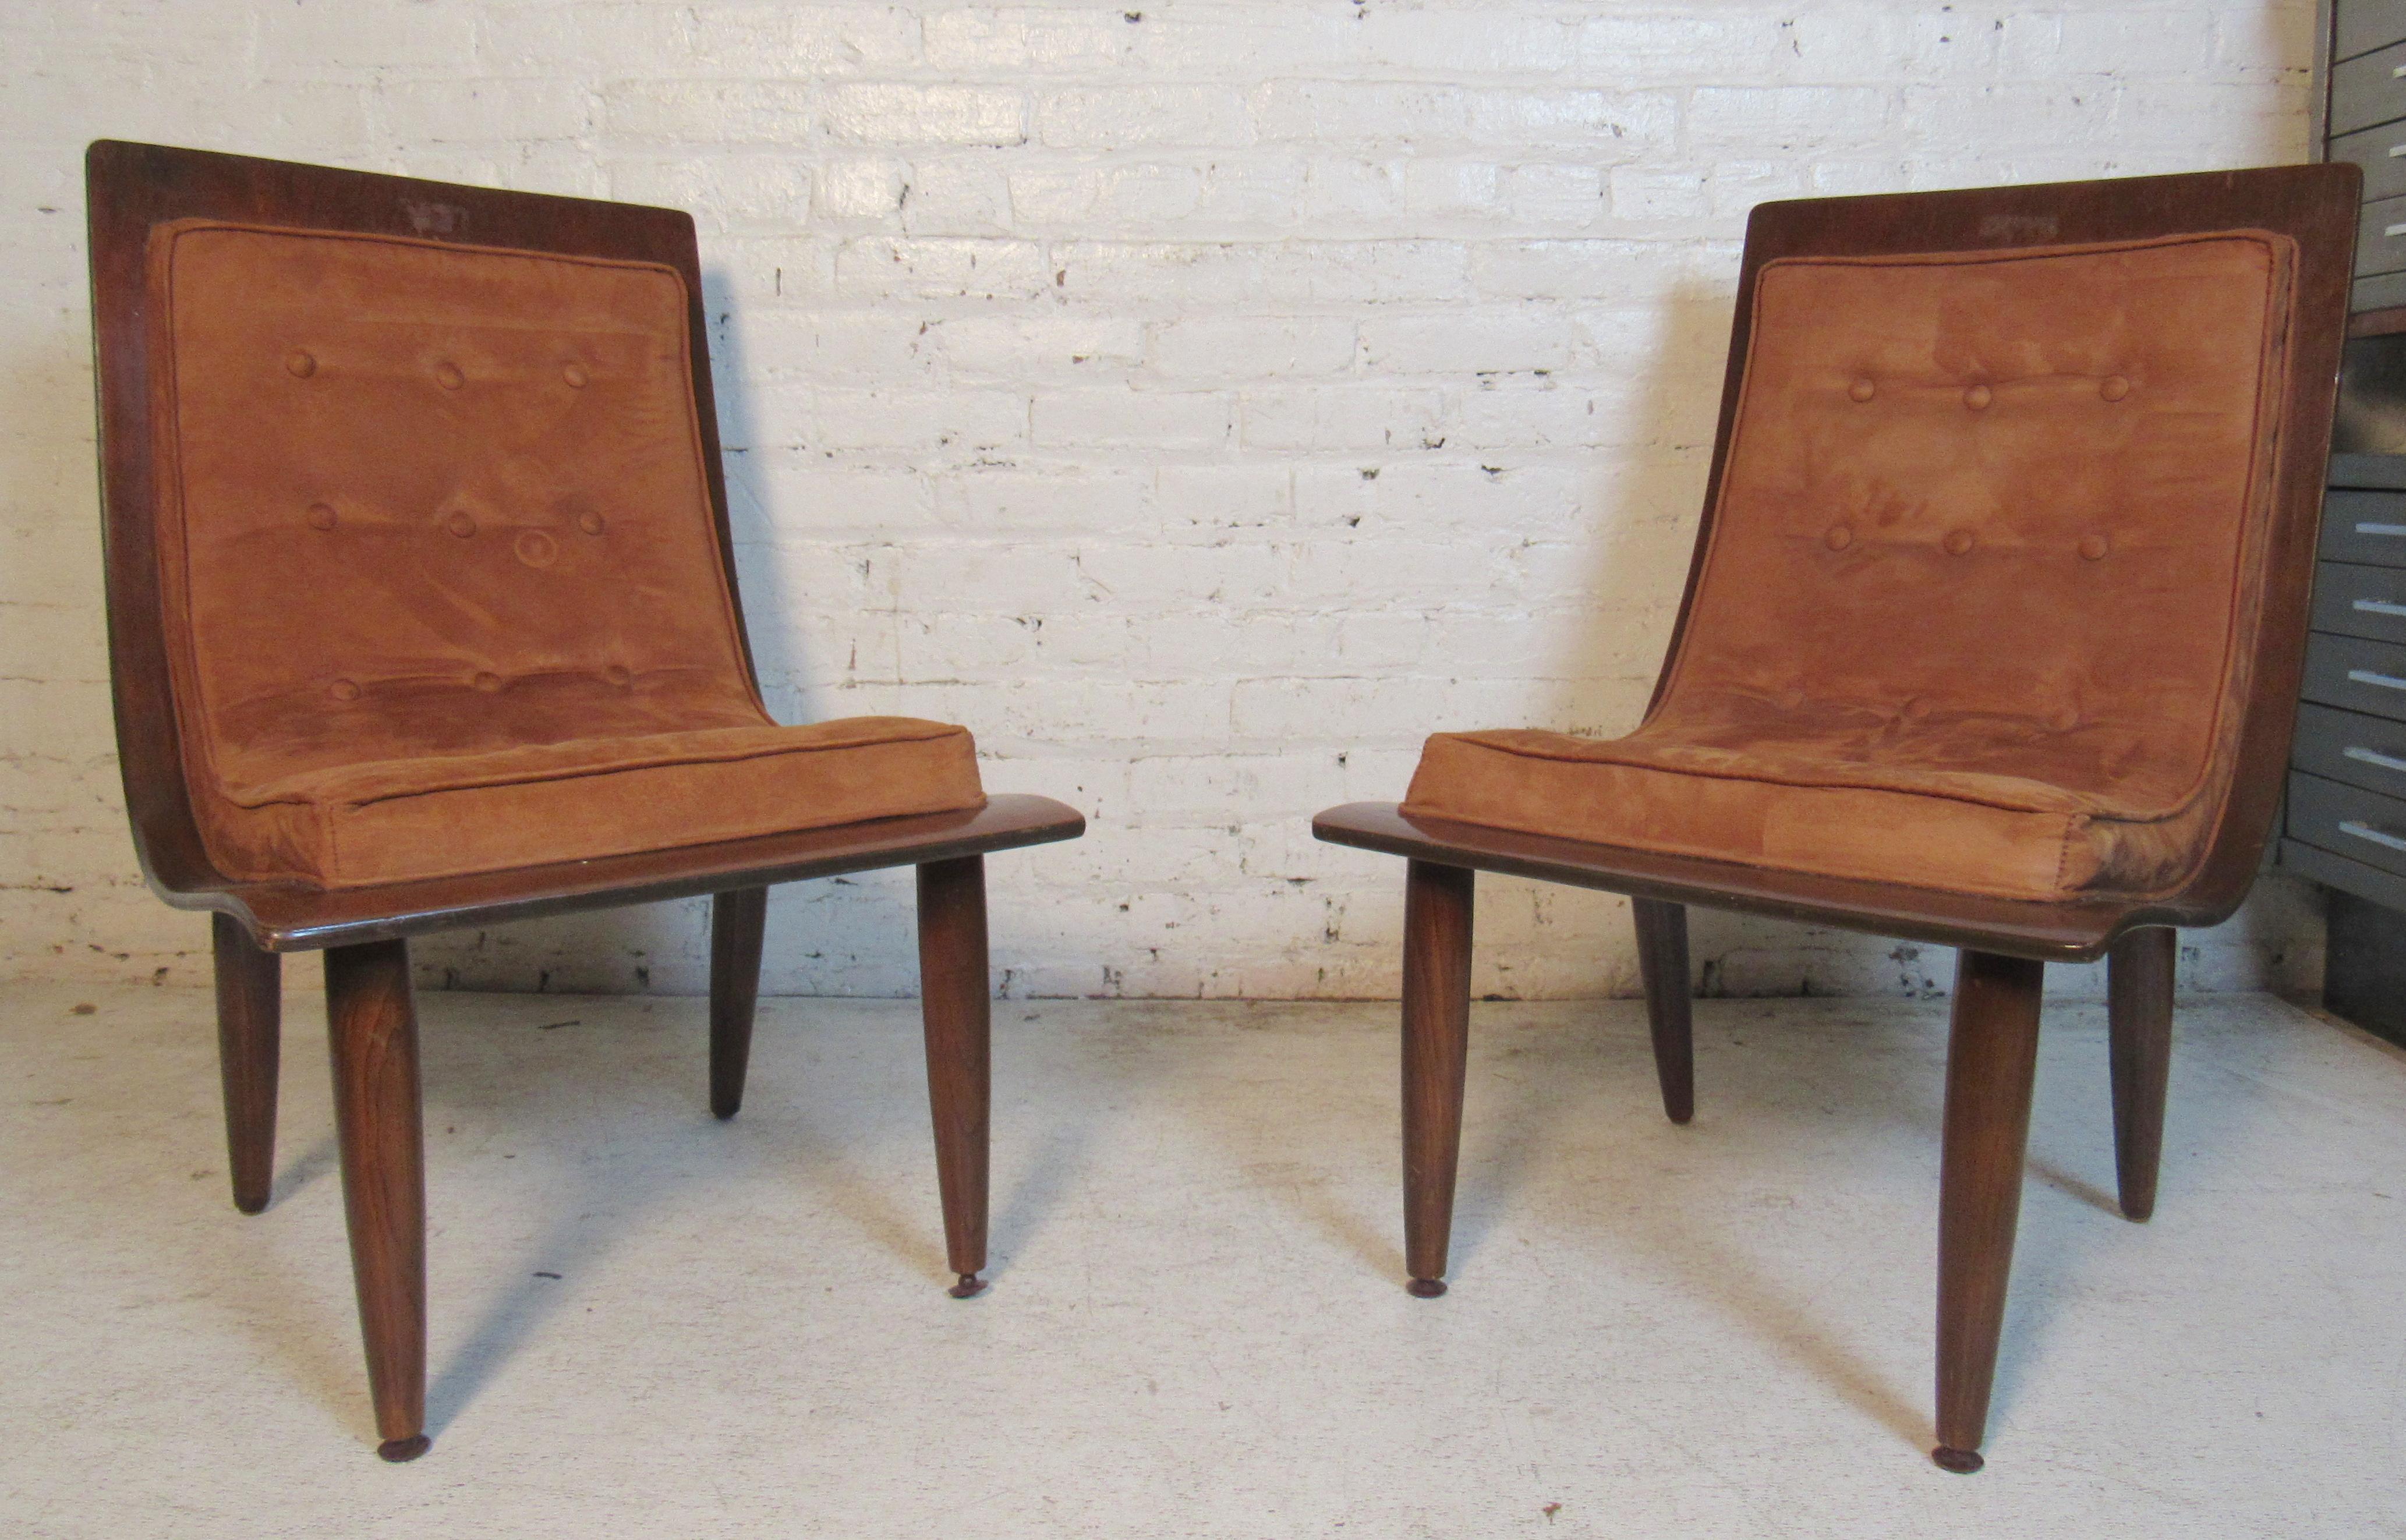 Pair of vintage modern slipper chairs by Carter Brother. Bentwood frame with tapered legs and tufted suede.
(Please confirm item location - NY or NJ - with dealer).
 